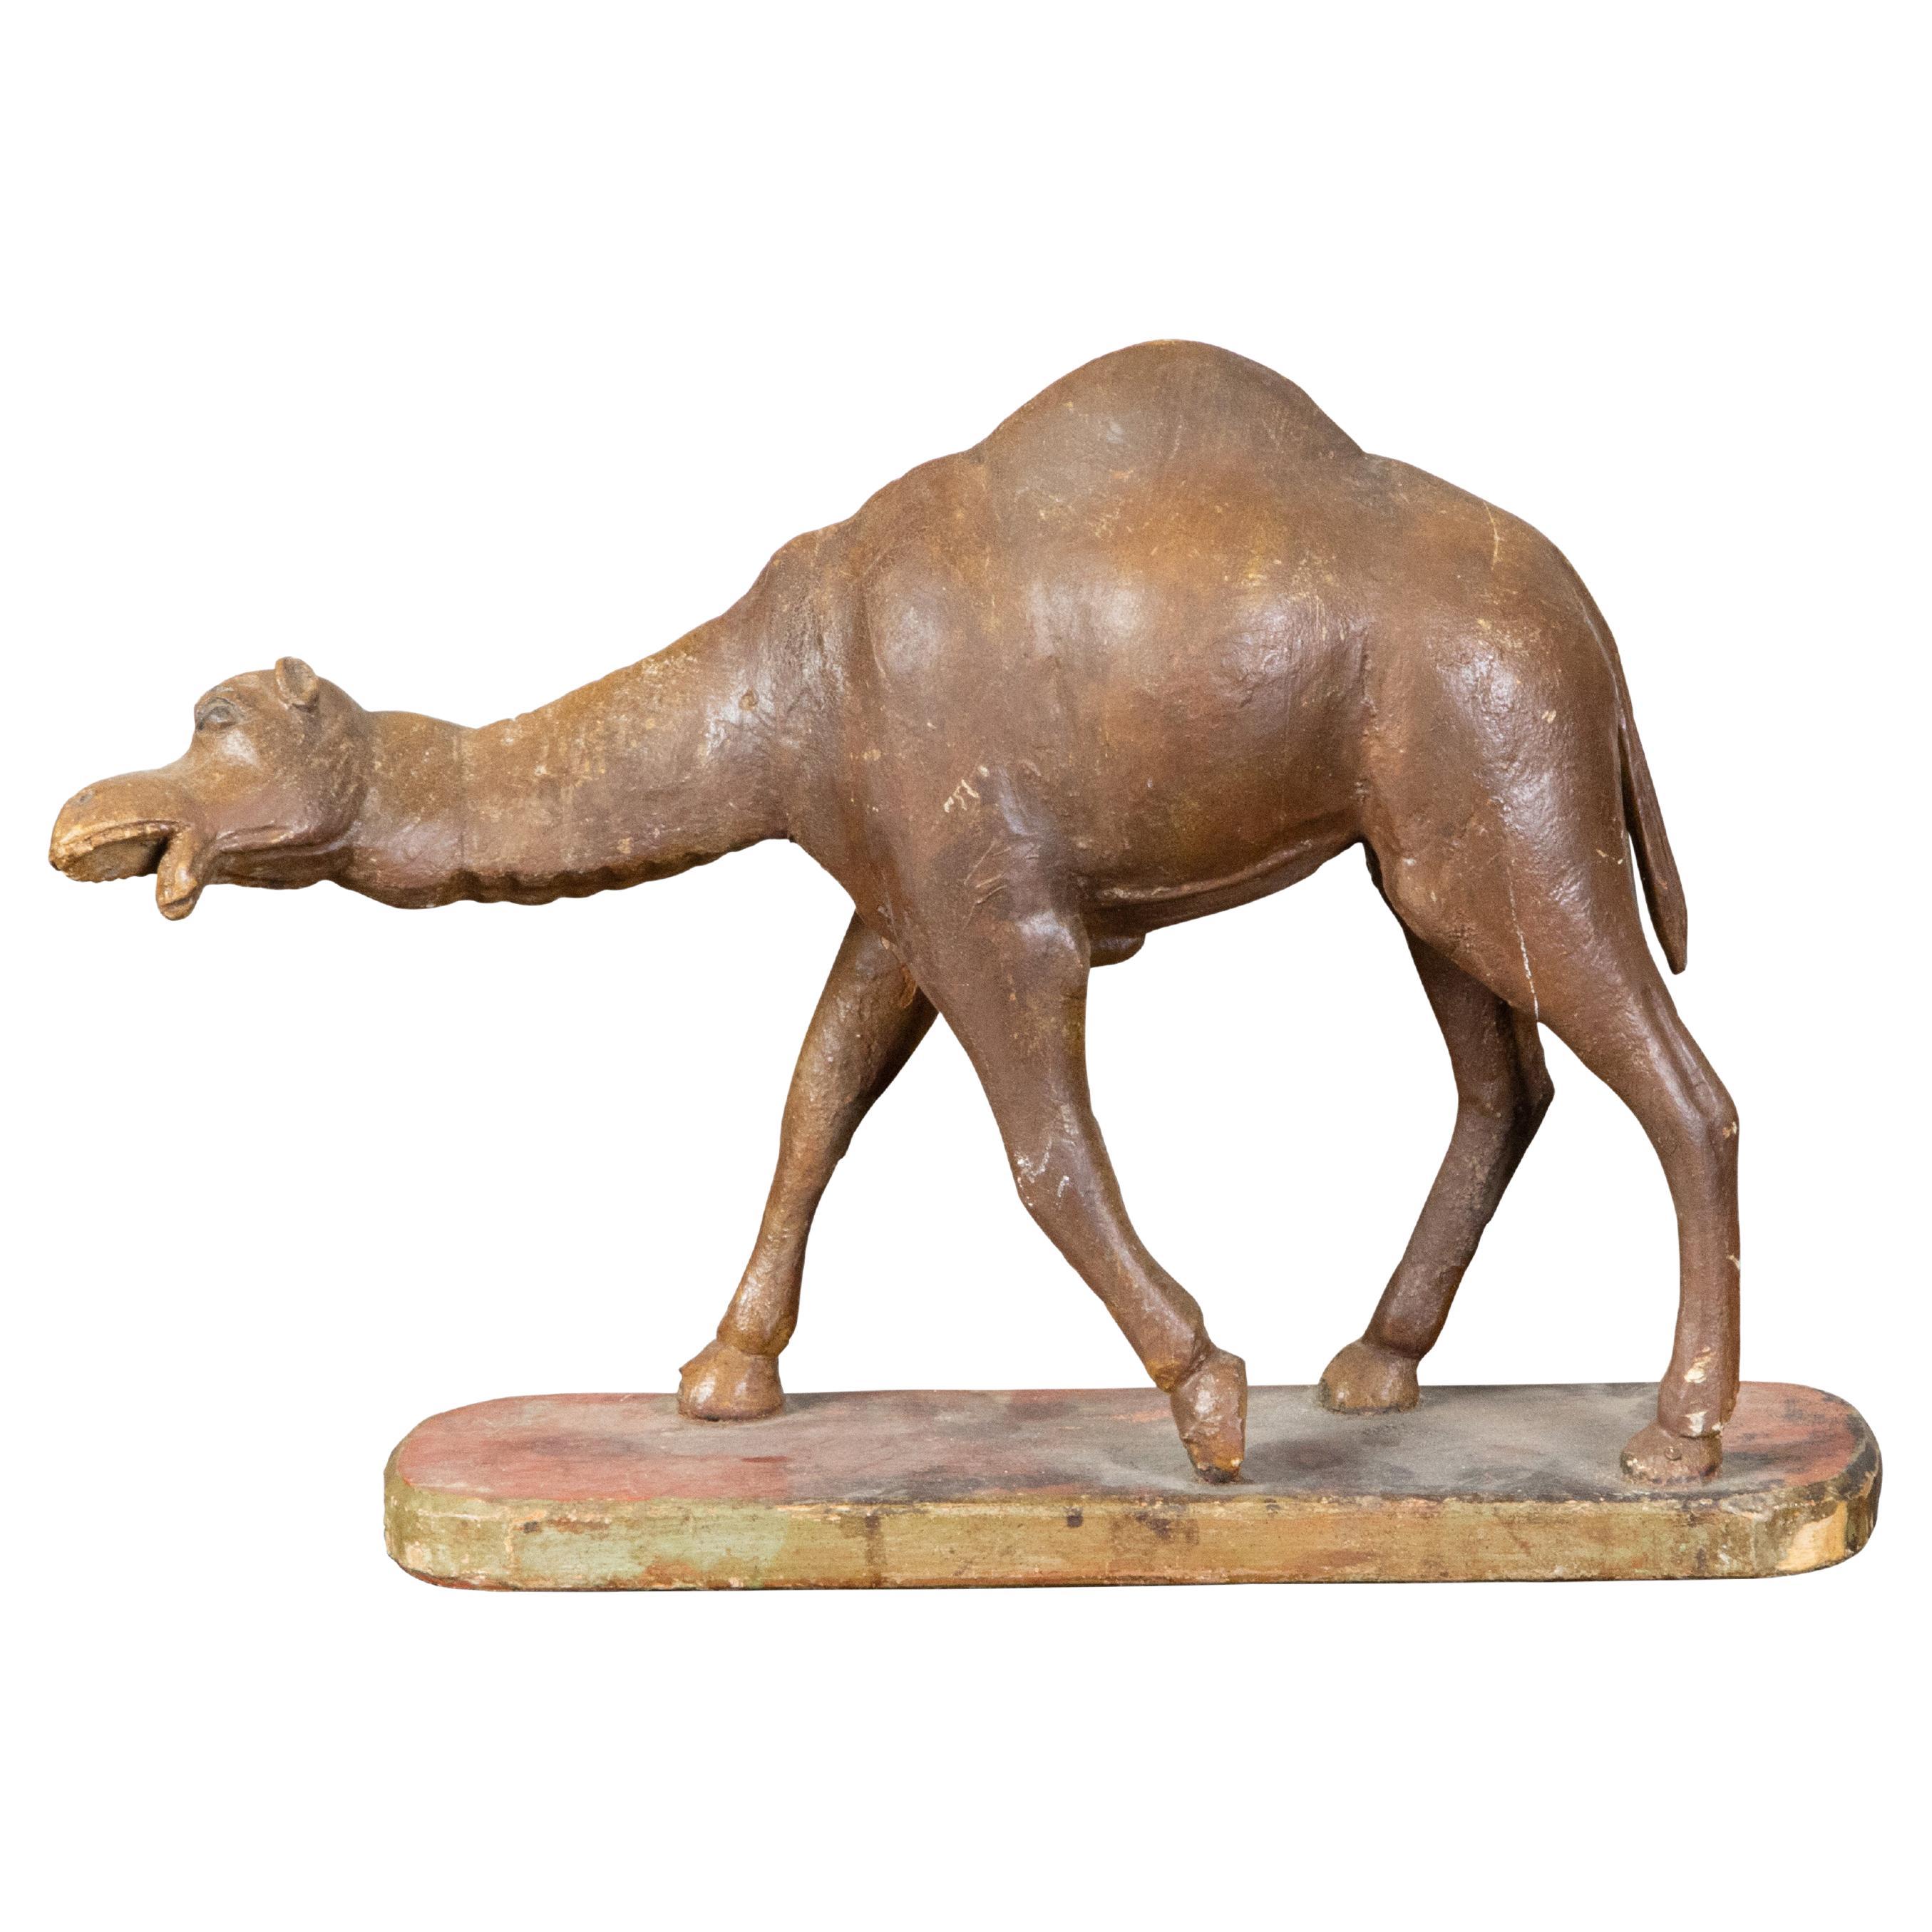 19th Century Italian Carved Wooden Dromedary Camel Sculpture on Oval Base